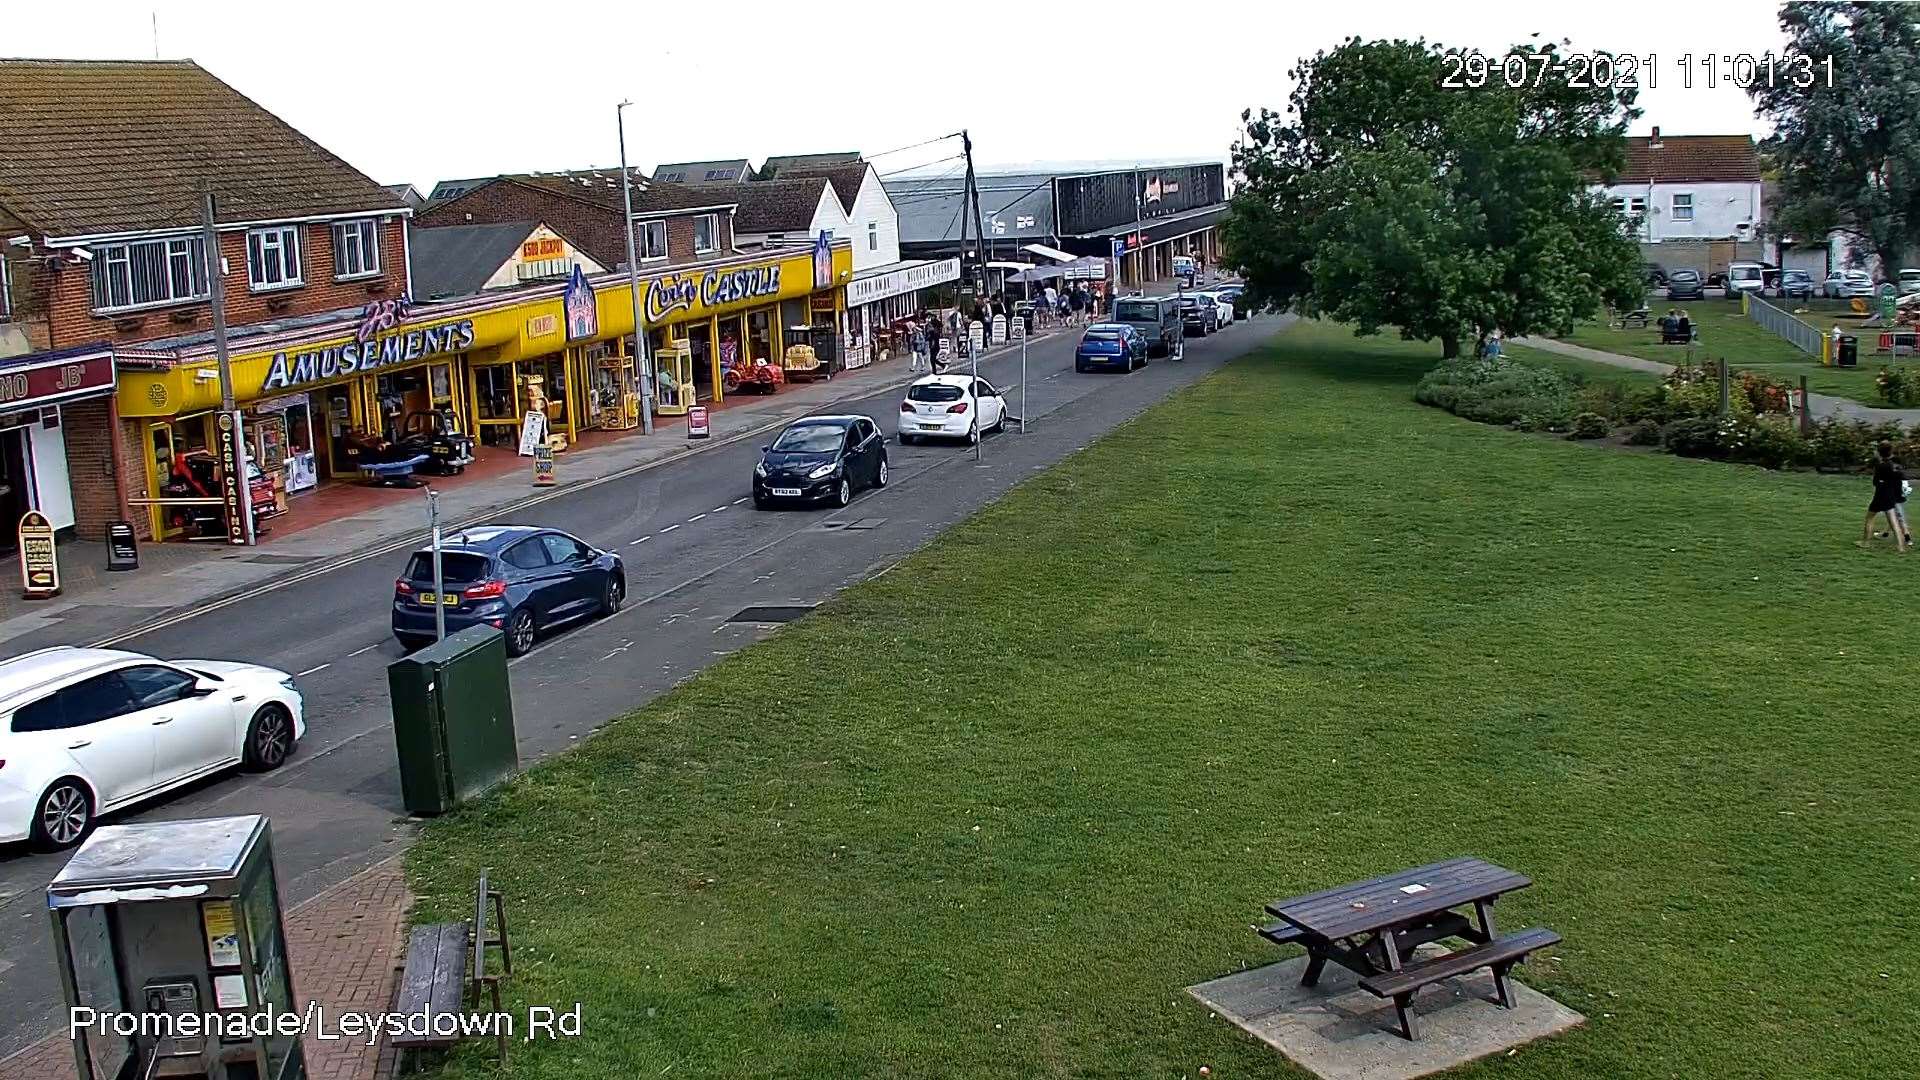 One of the locations to be monitored is the promenade. Picture: Swale council